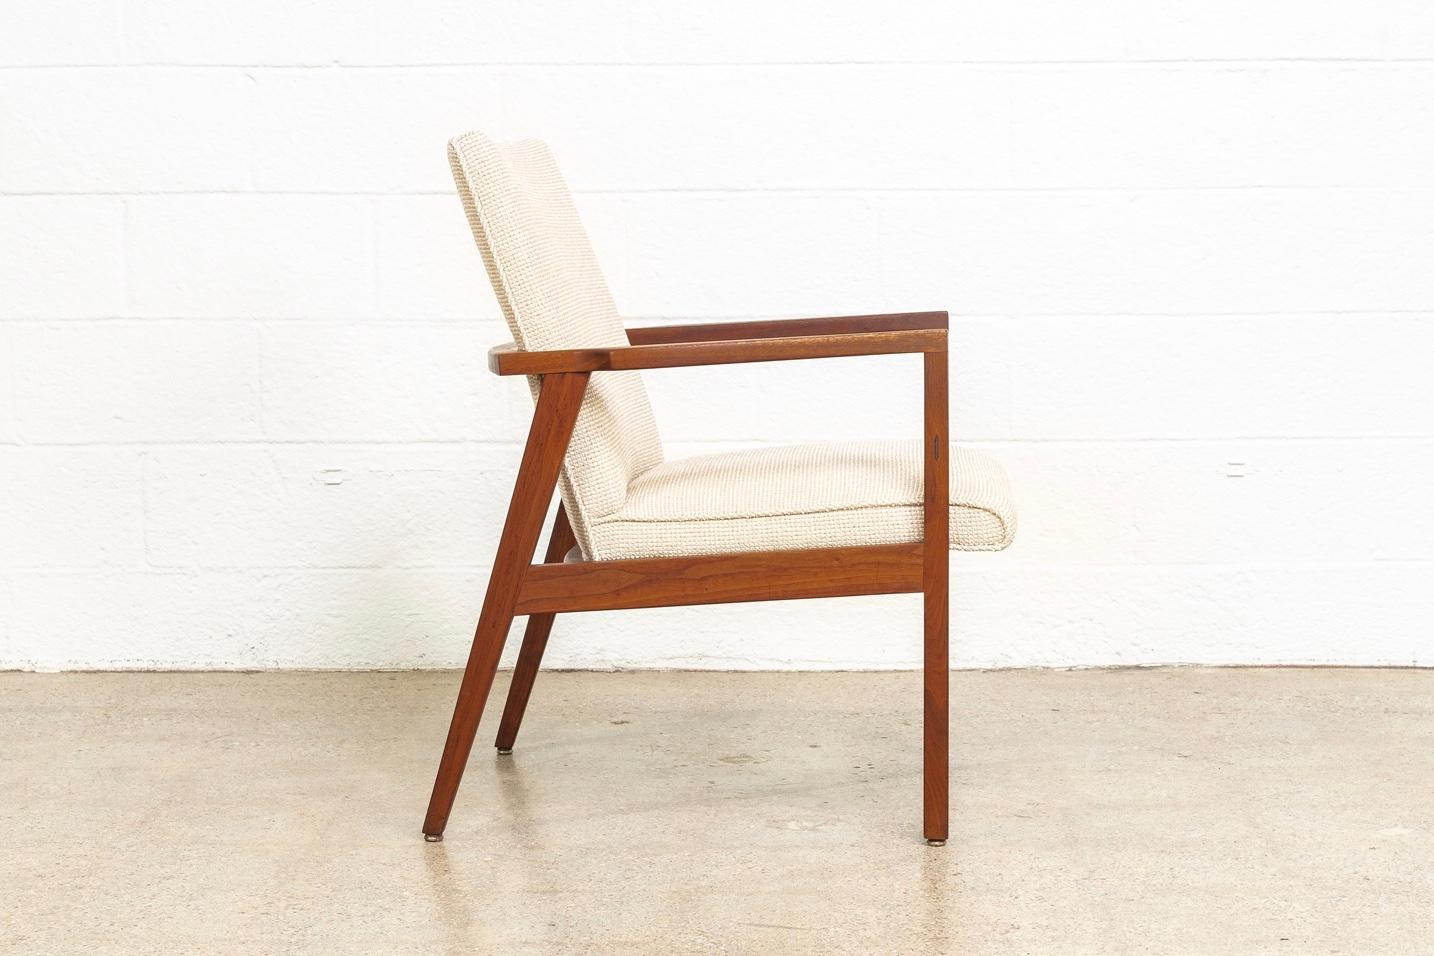 American Midcentury Jens Risom Upholstered Lounge Chair, 1960s For Sale